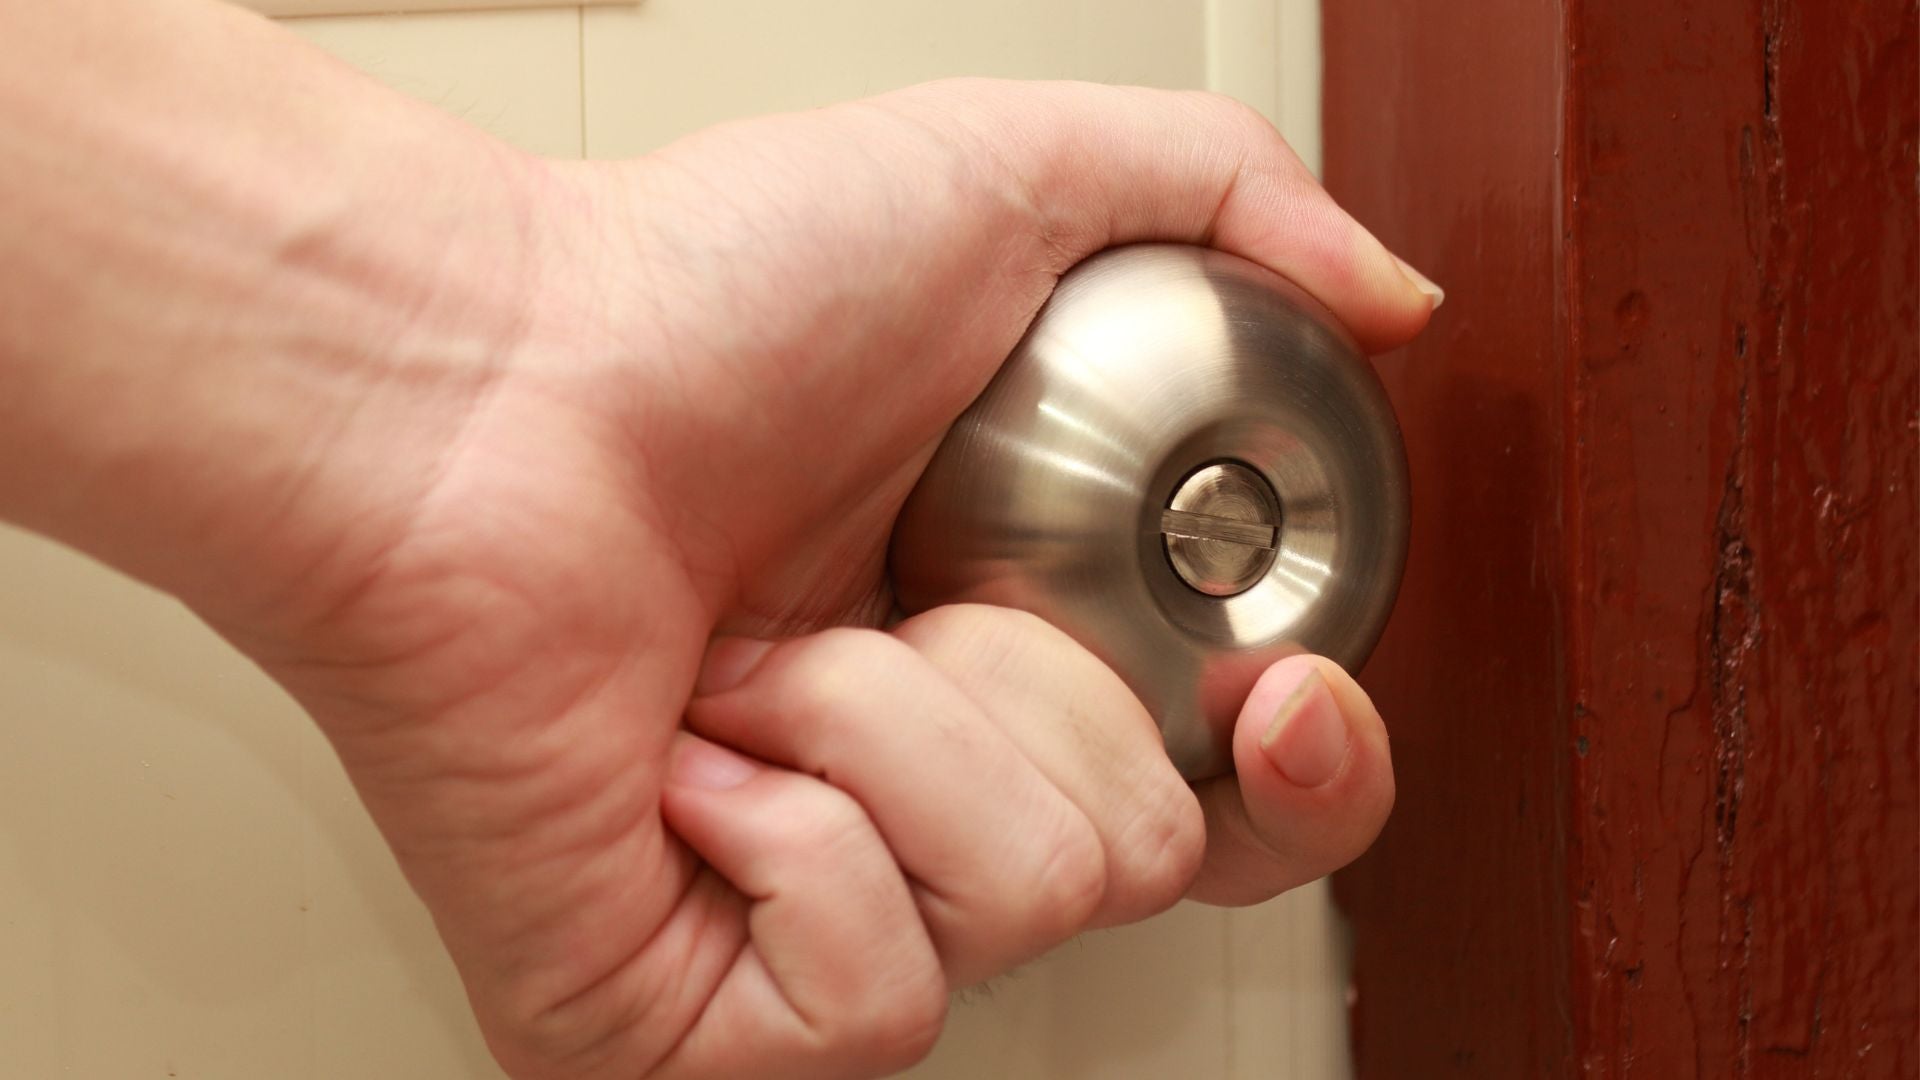 Hockey tape on doorknob to prevent slipping for grip